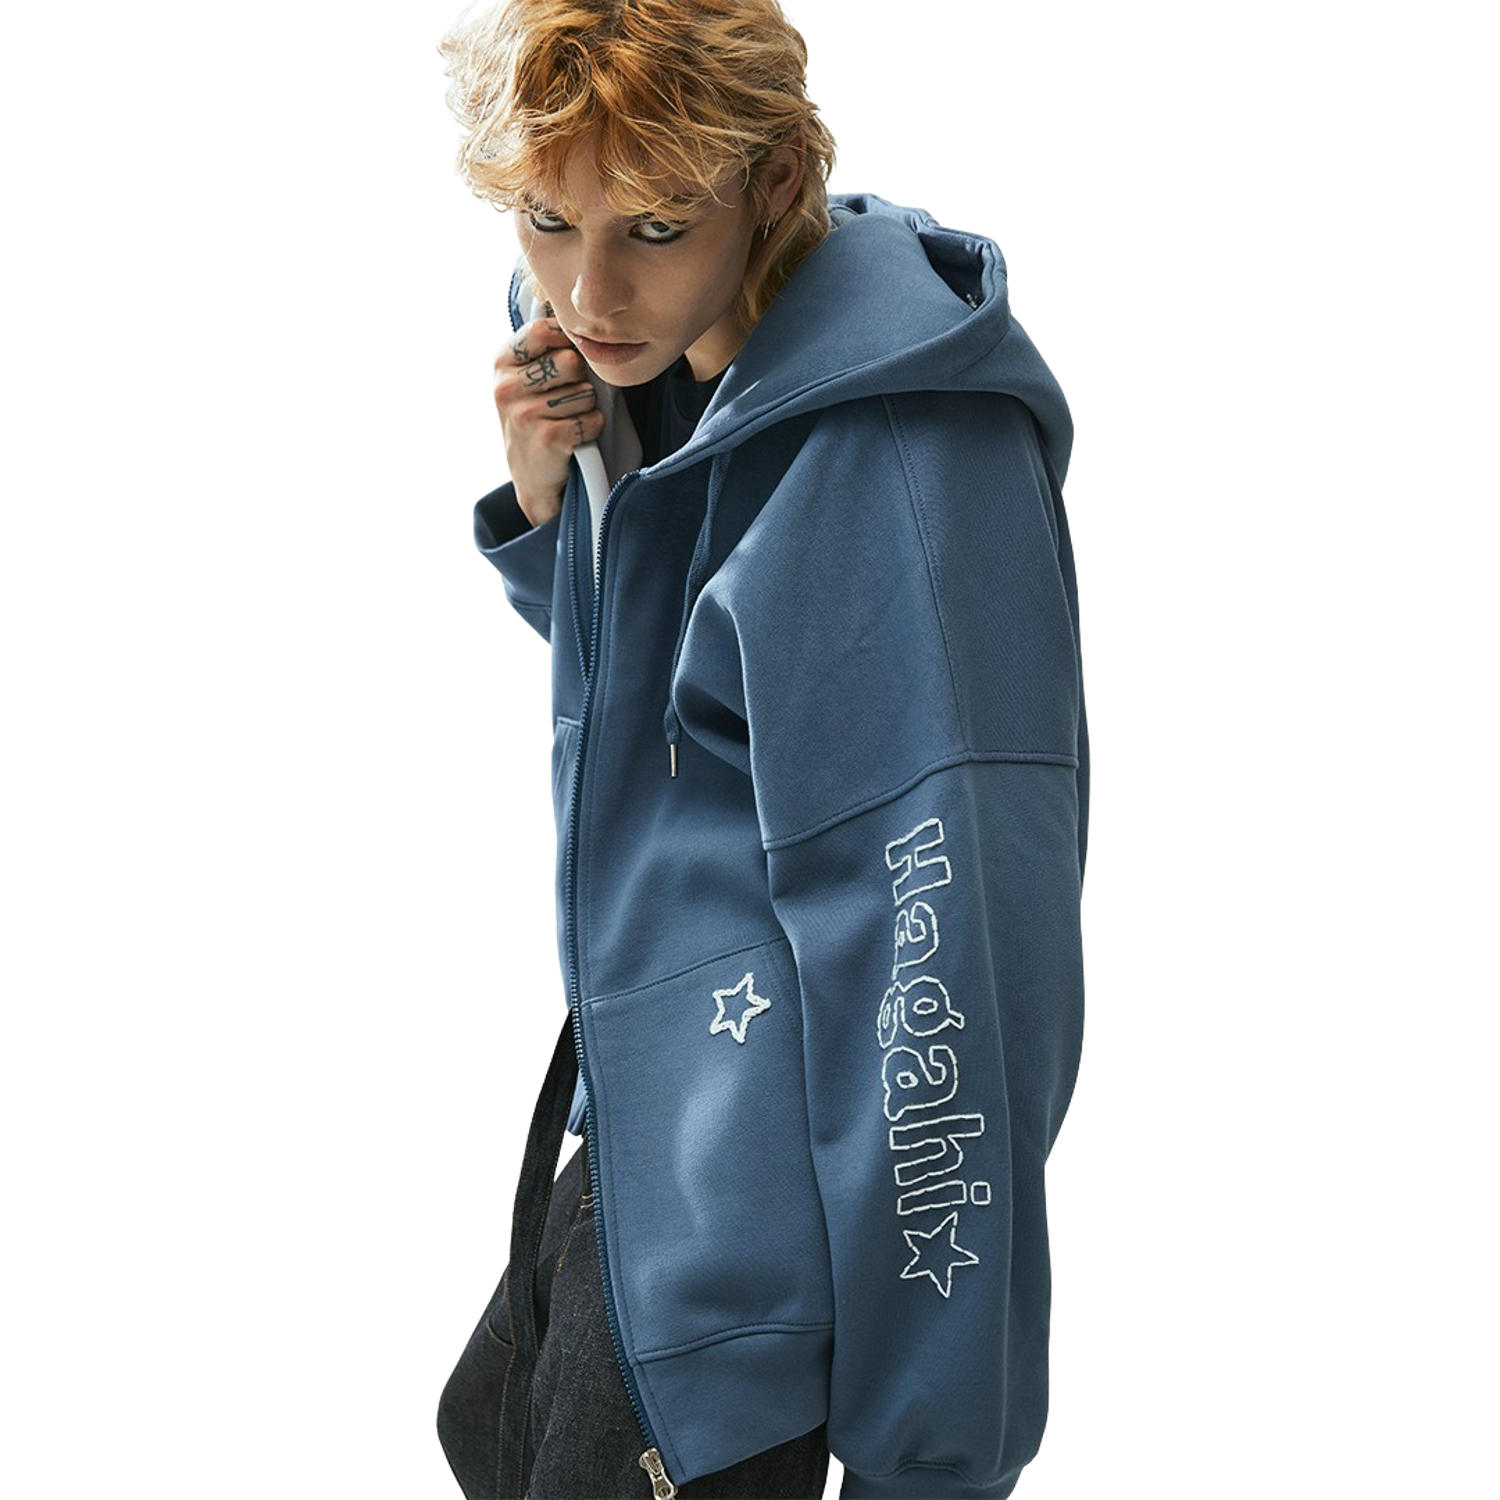 Star-Wars Hand-Embroidery Hoodie Zip-up (Fade Blue)